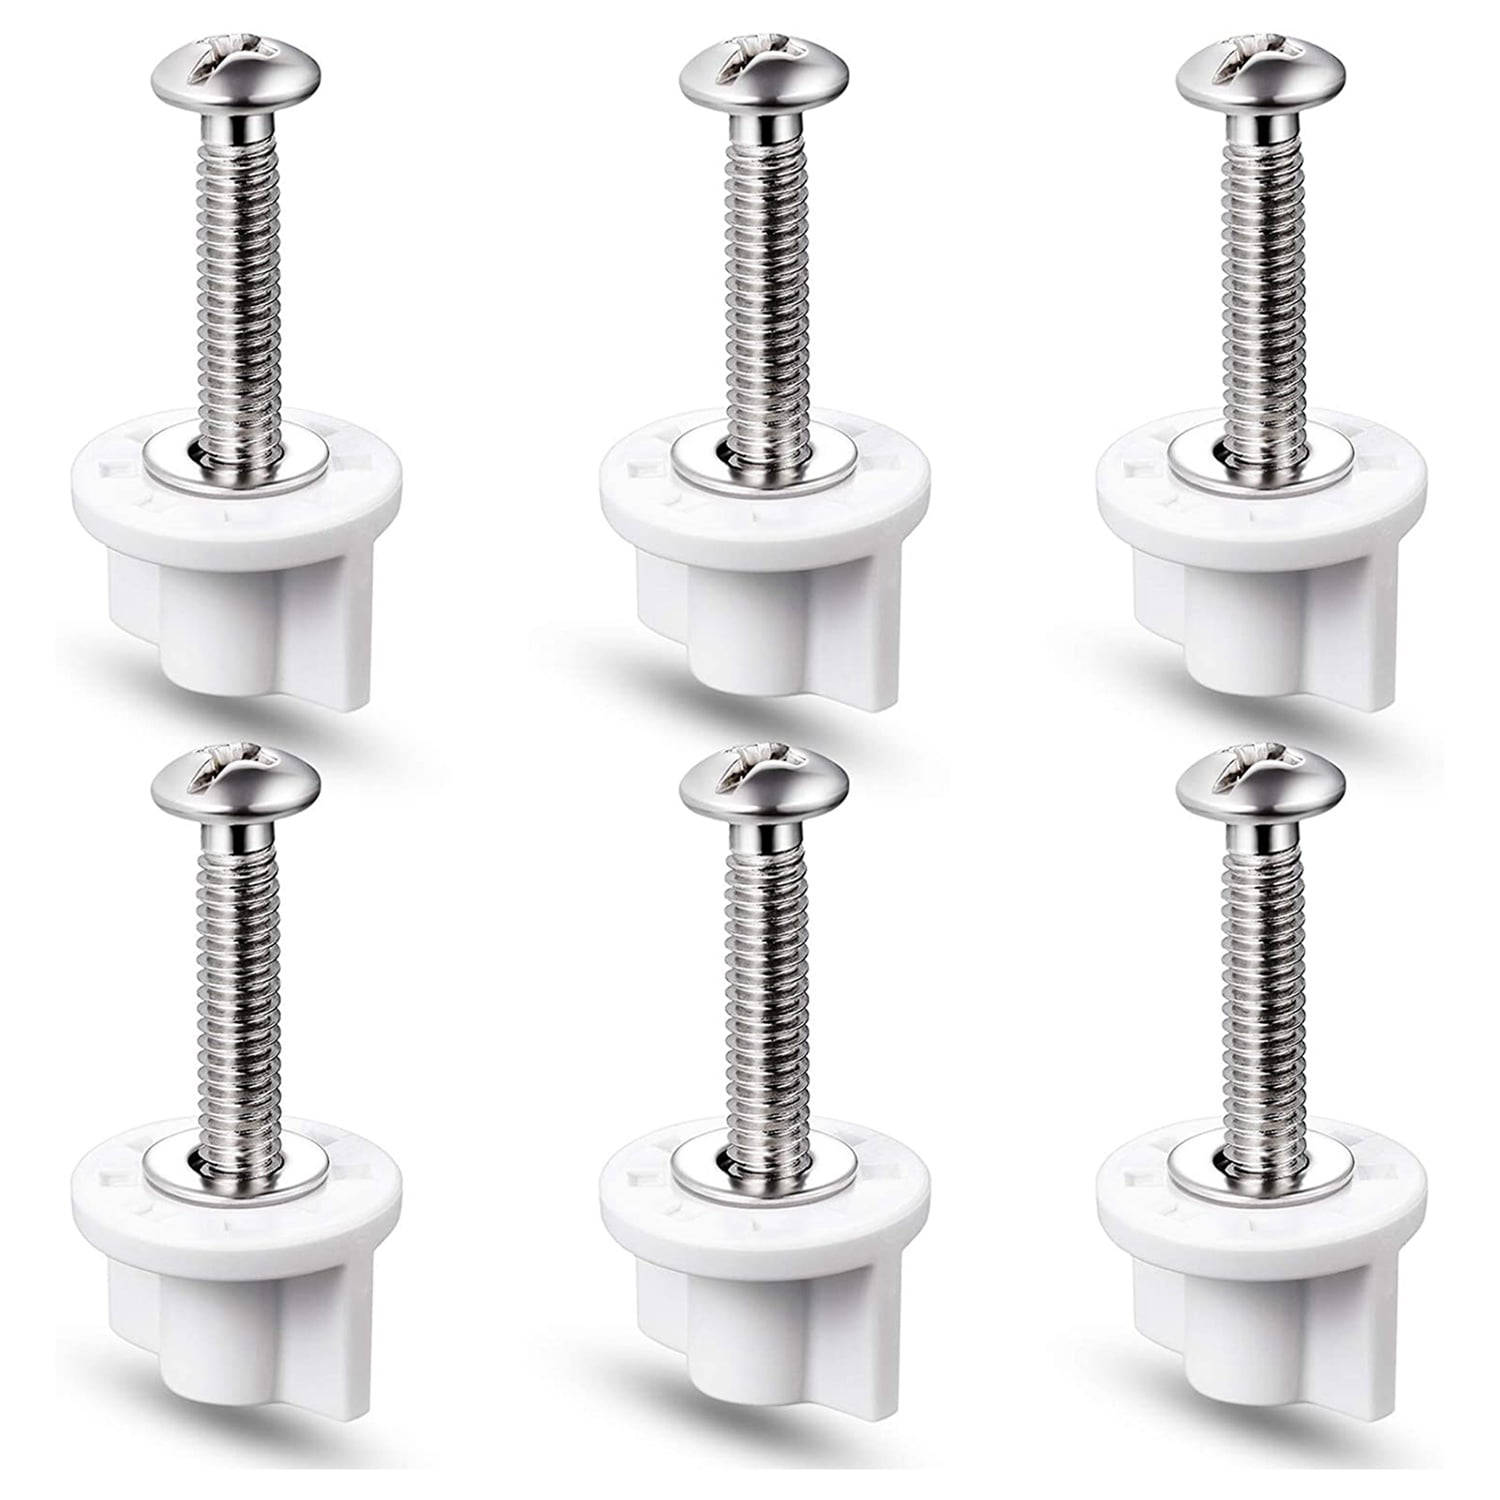 Hinge With Screw Universal Seat Replacement Stainless Steel Toilet Hinges Tools 